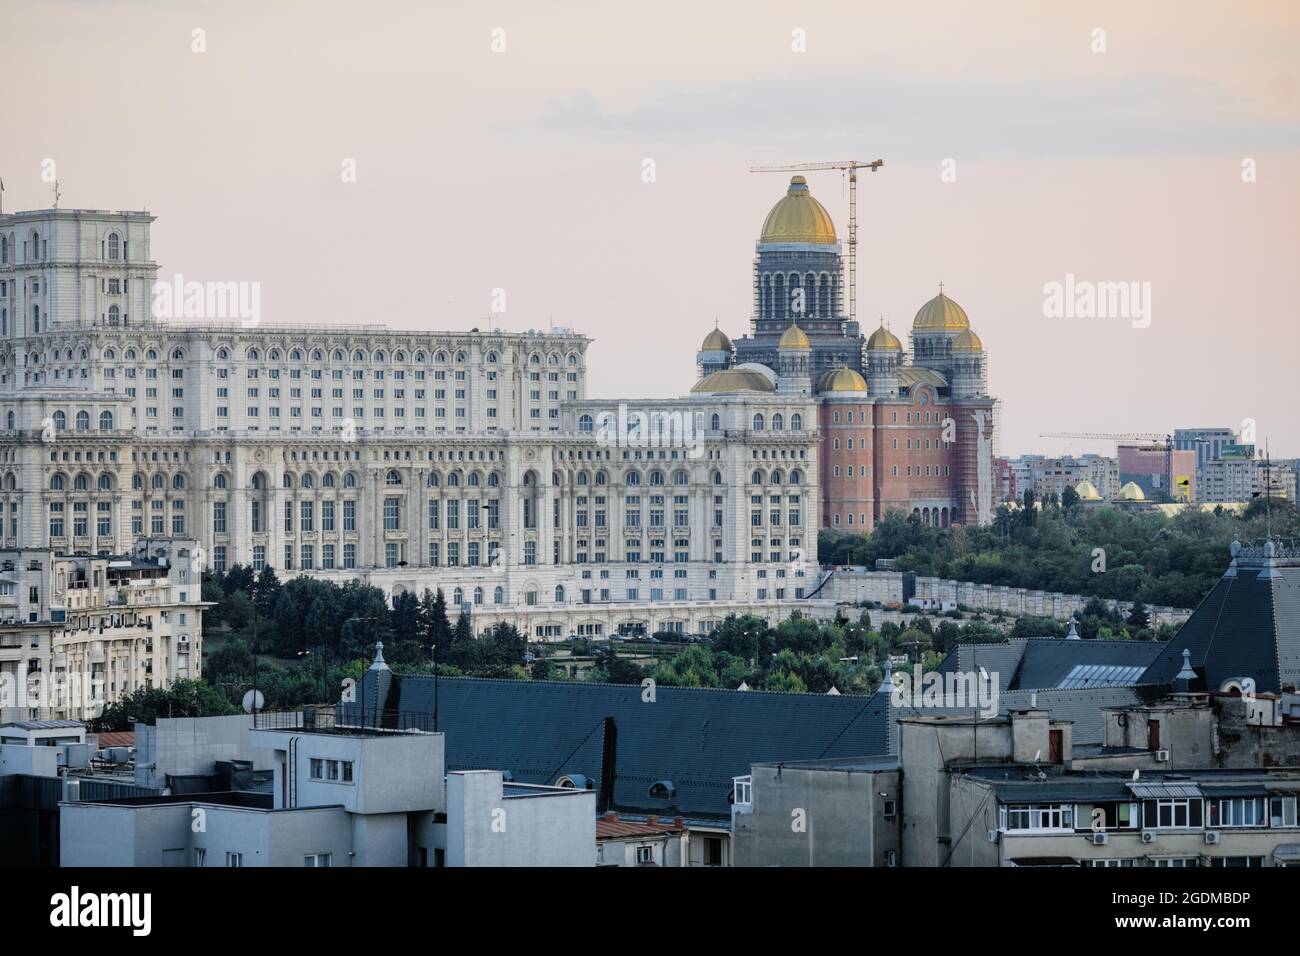 Bucharest, Romania - August 13, 2021:Construction site of “Catedrala  Mantuirii Neamului” (People's Salvation Cathedral), near the Palace of  Parliament Stock Photo - Alamy